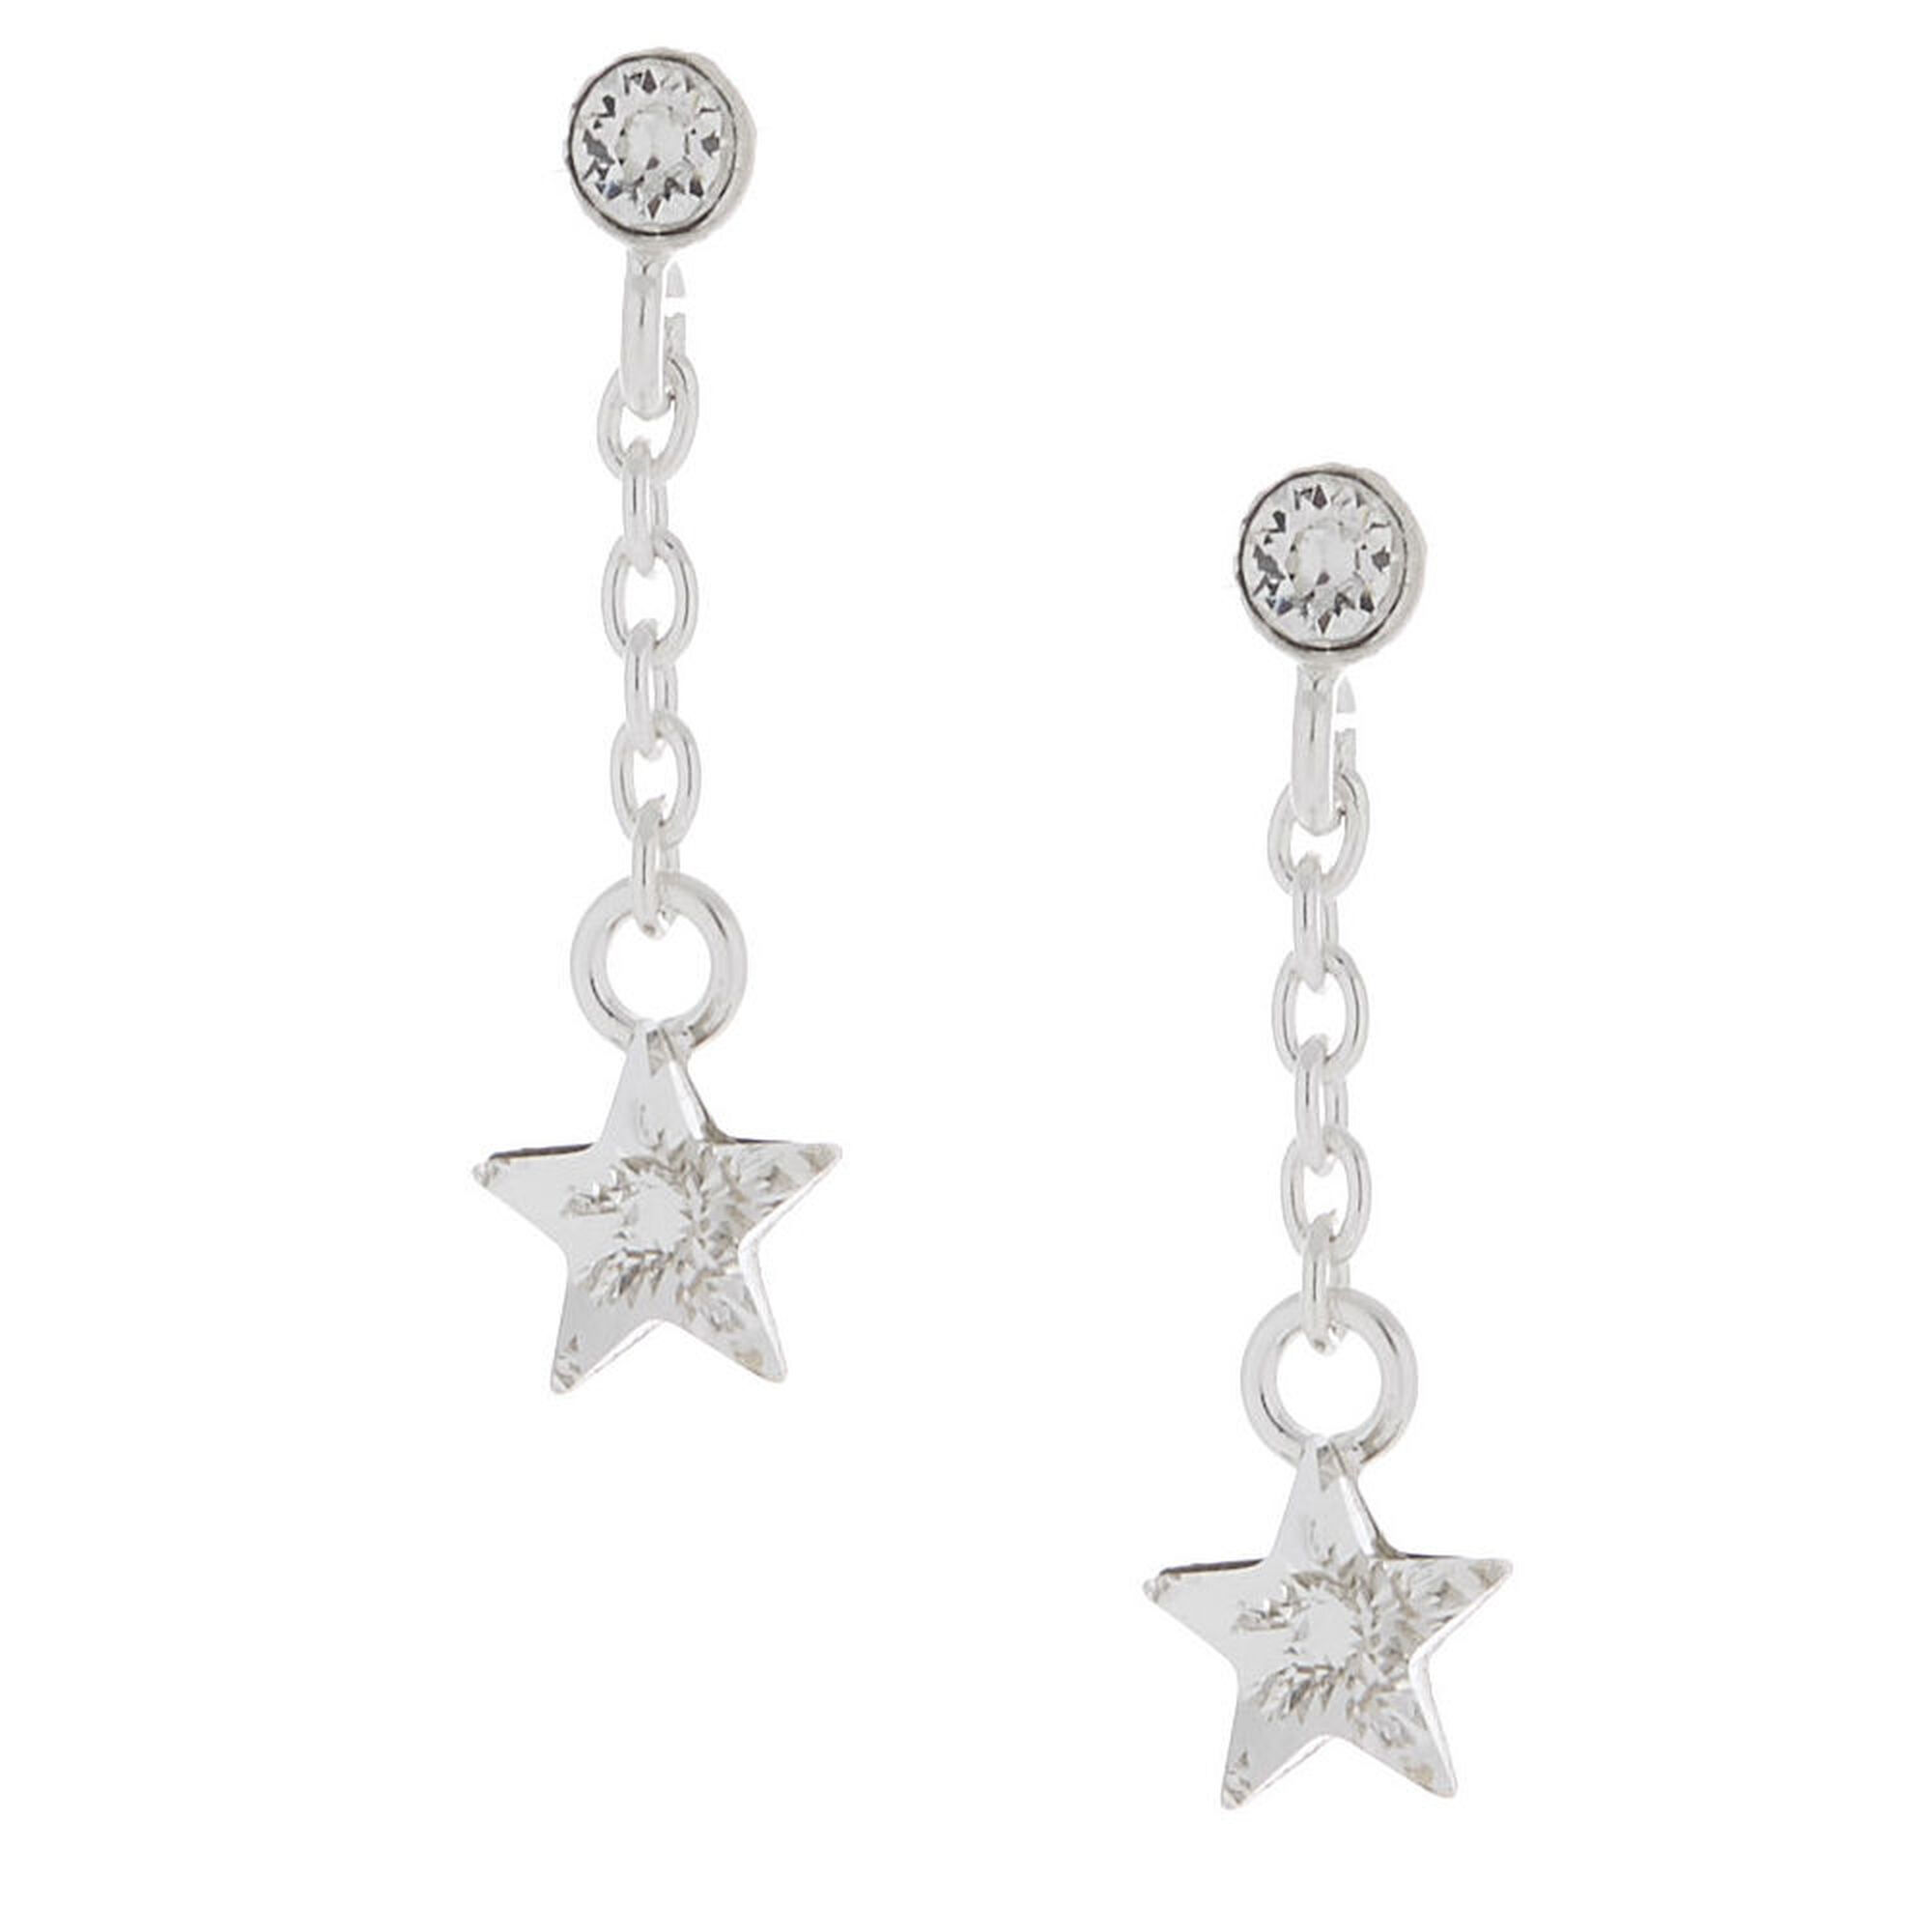 View Claires 1 Crystal Star Drop Earrings Silver information